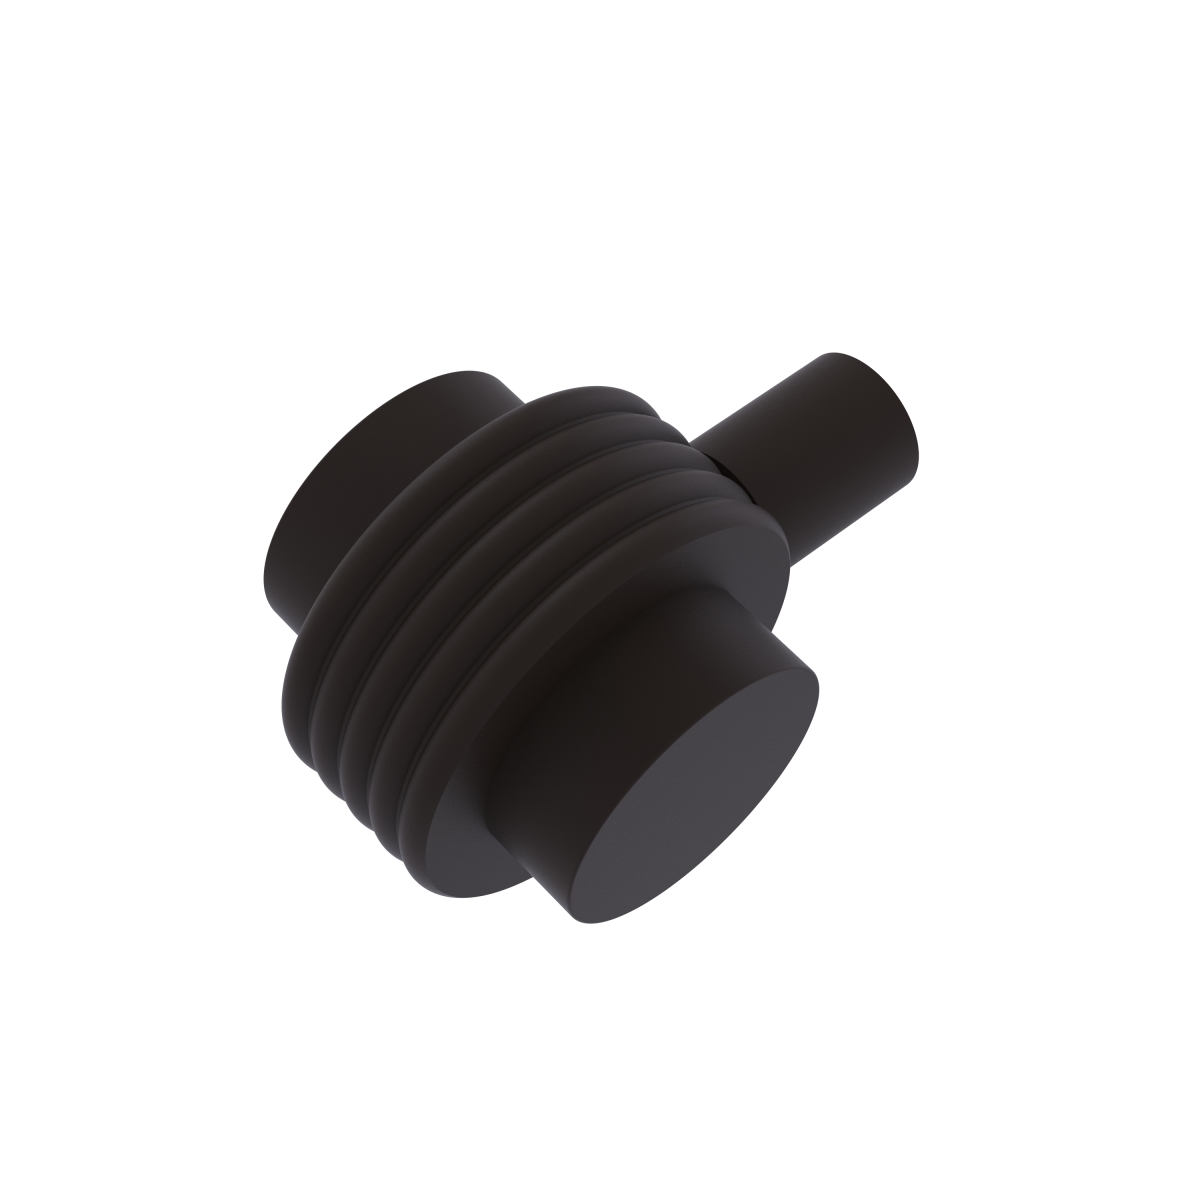 102g-orb Grooved Ring Style 1.50 In. Cabinet Hardware Knob, Oil Rubbed Bronze